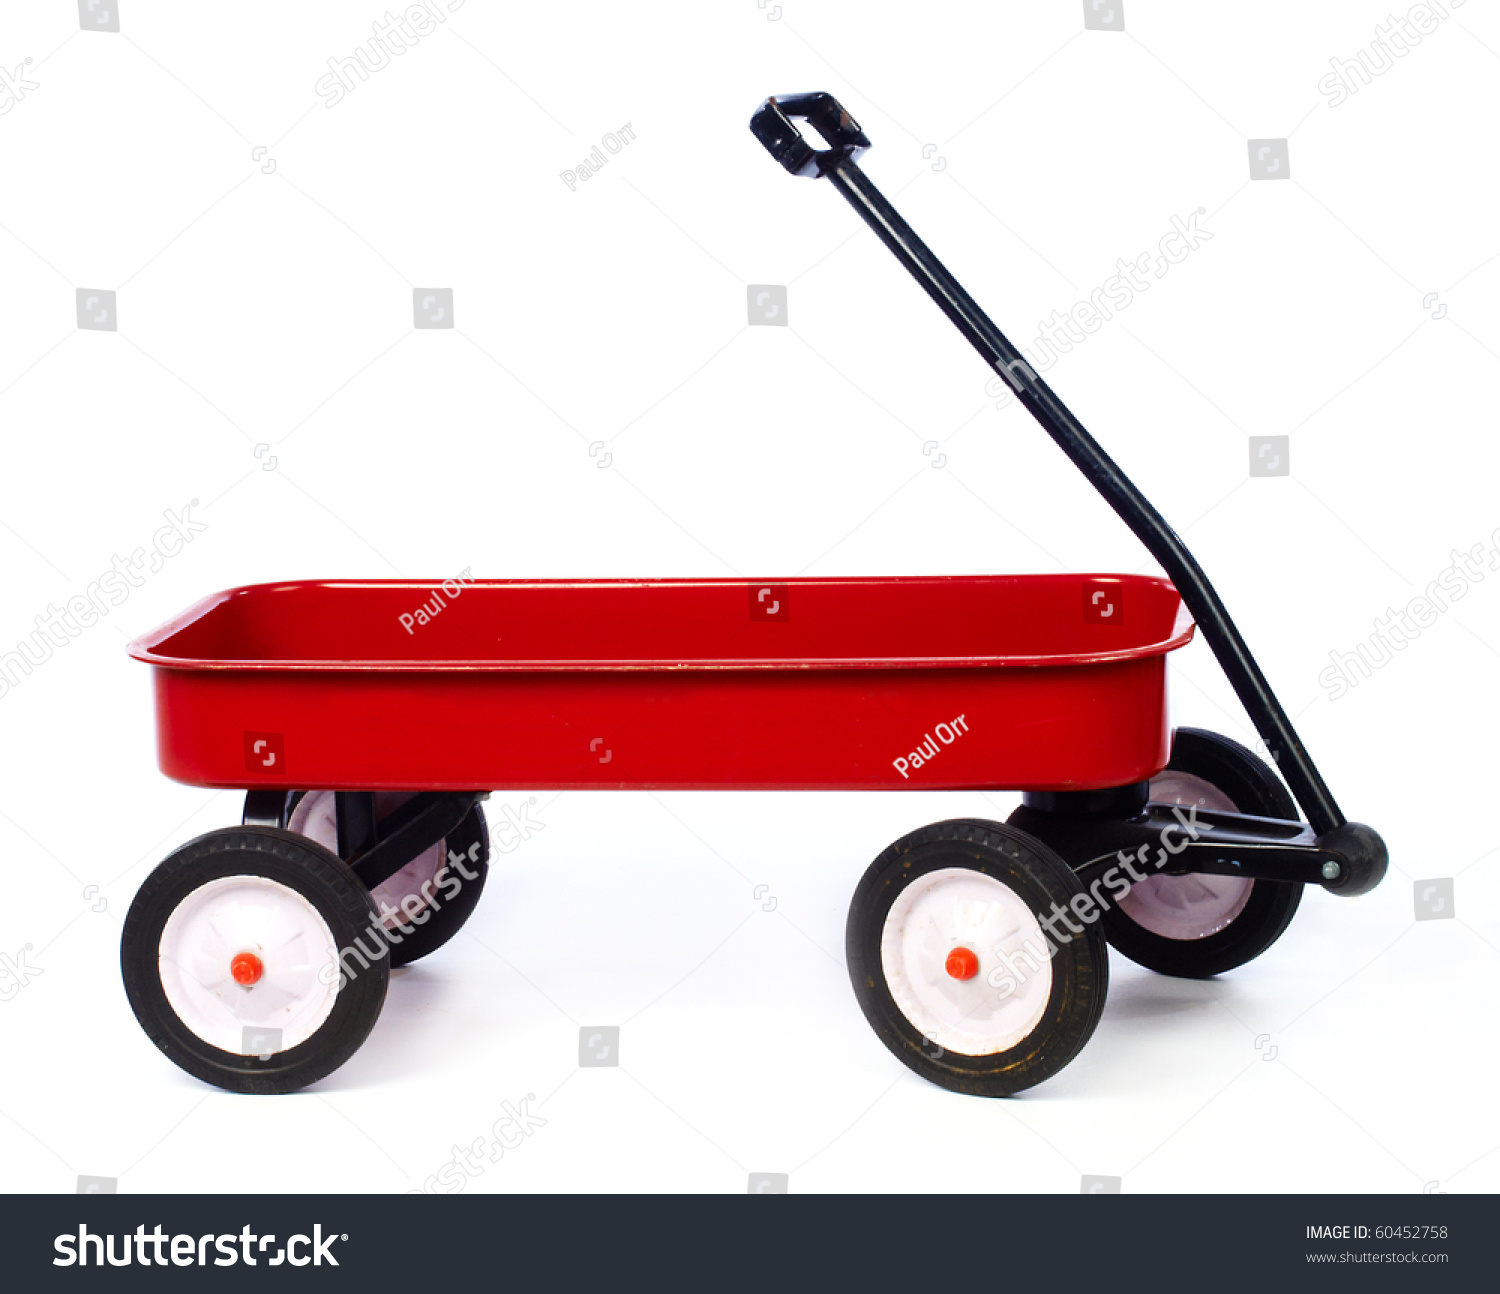 Toy red wagon on white full size #60452758